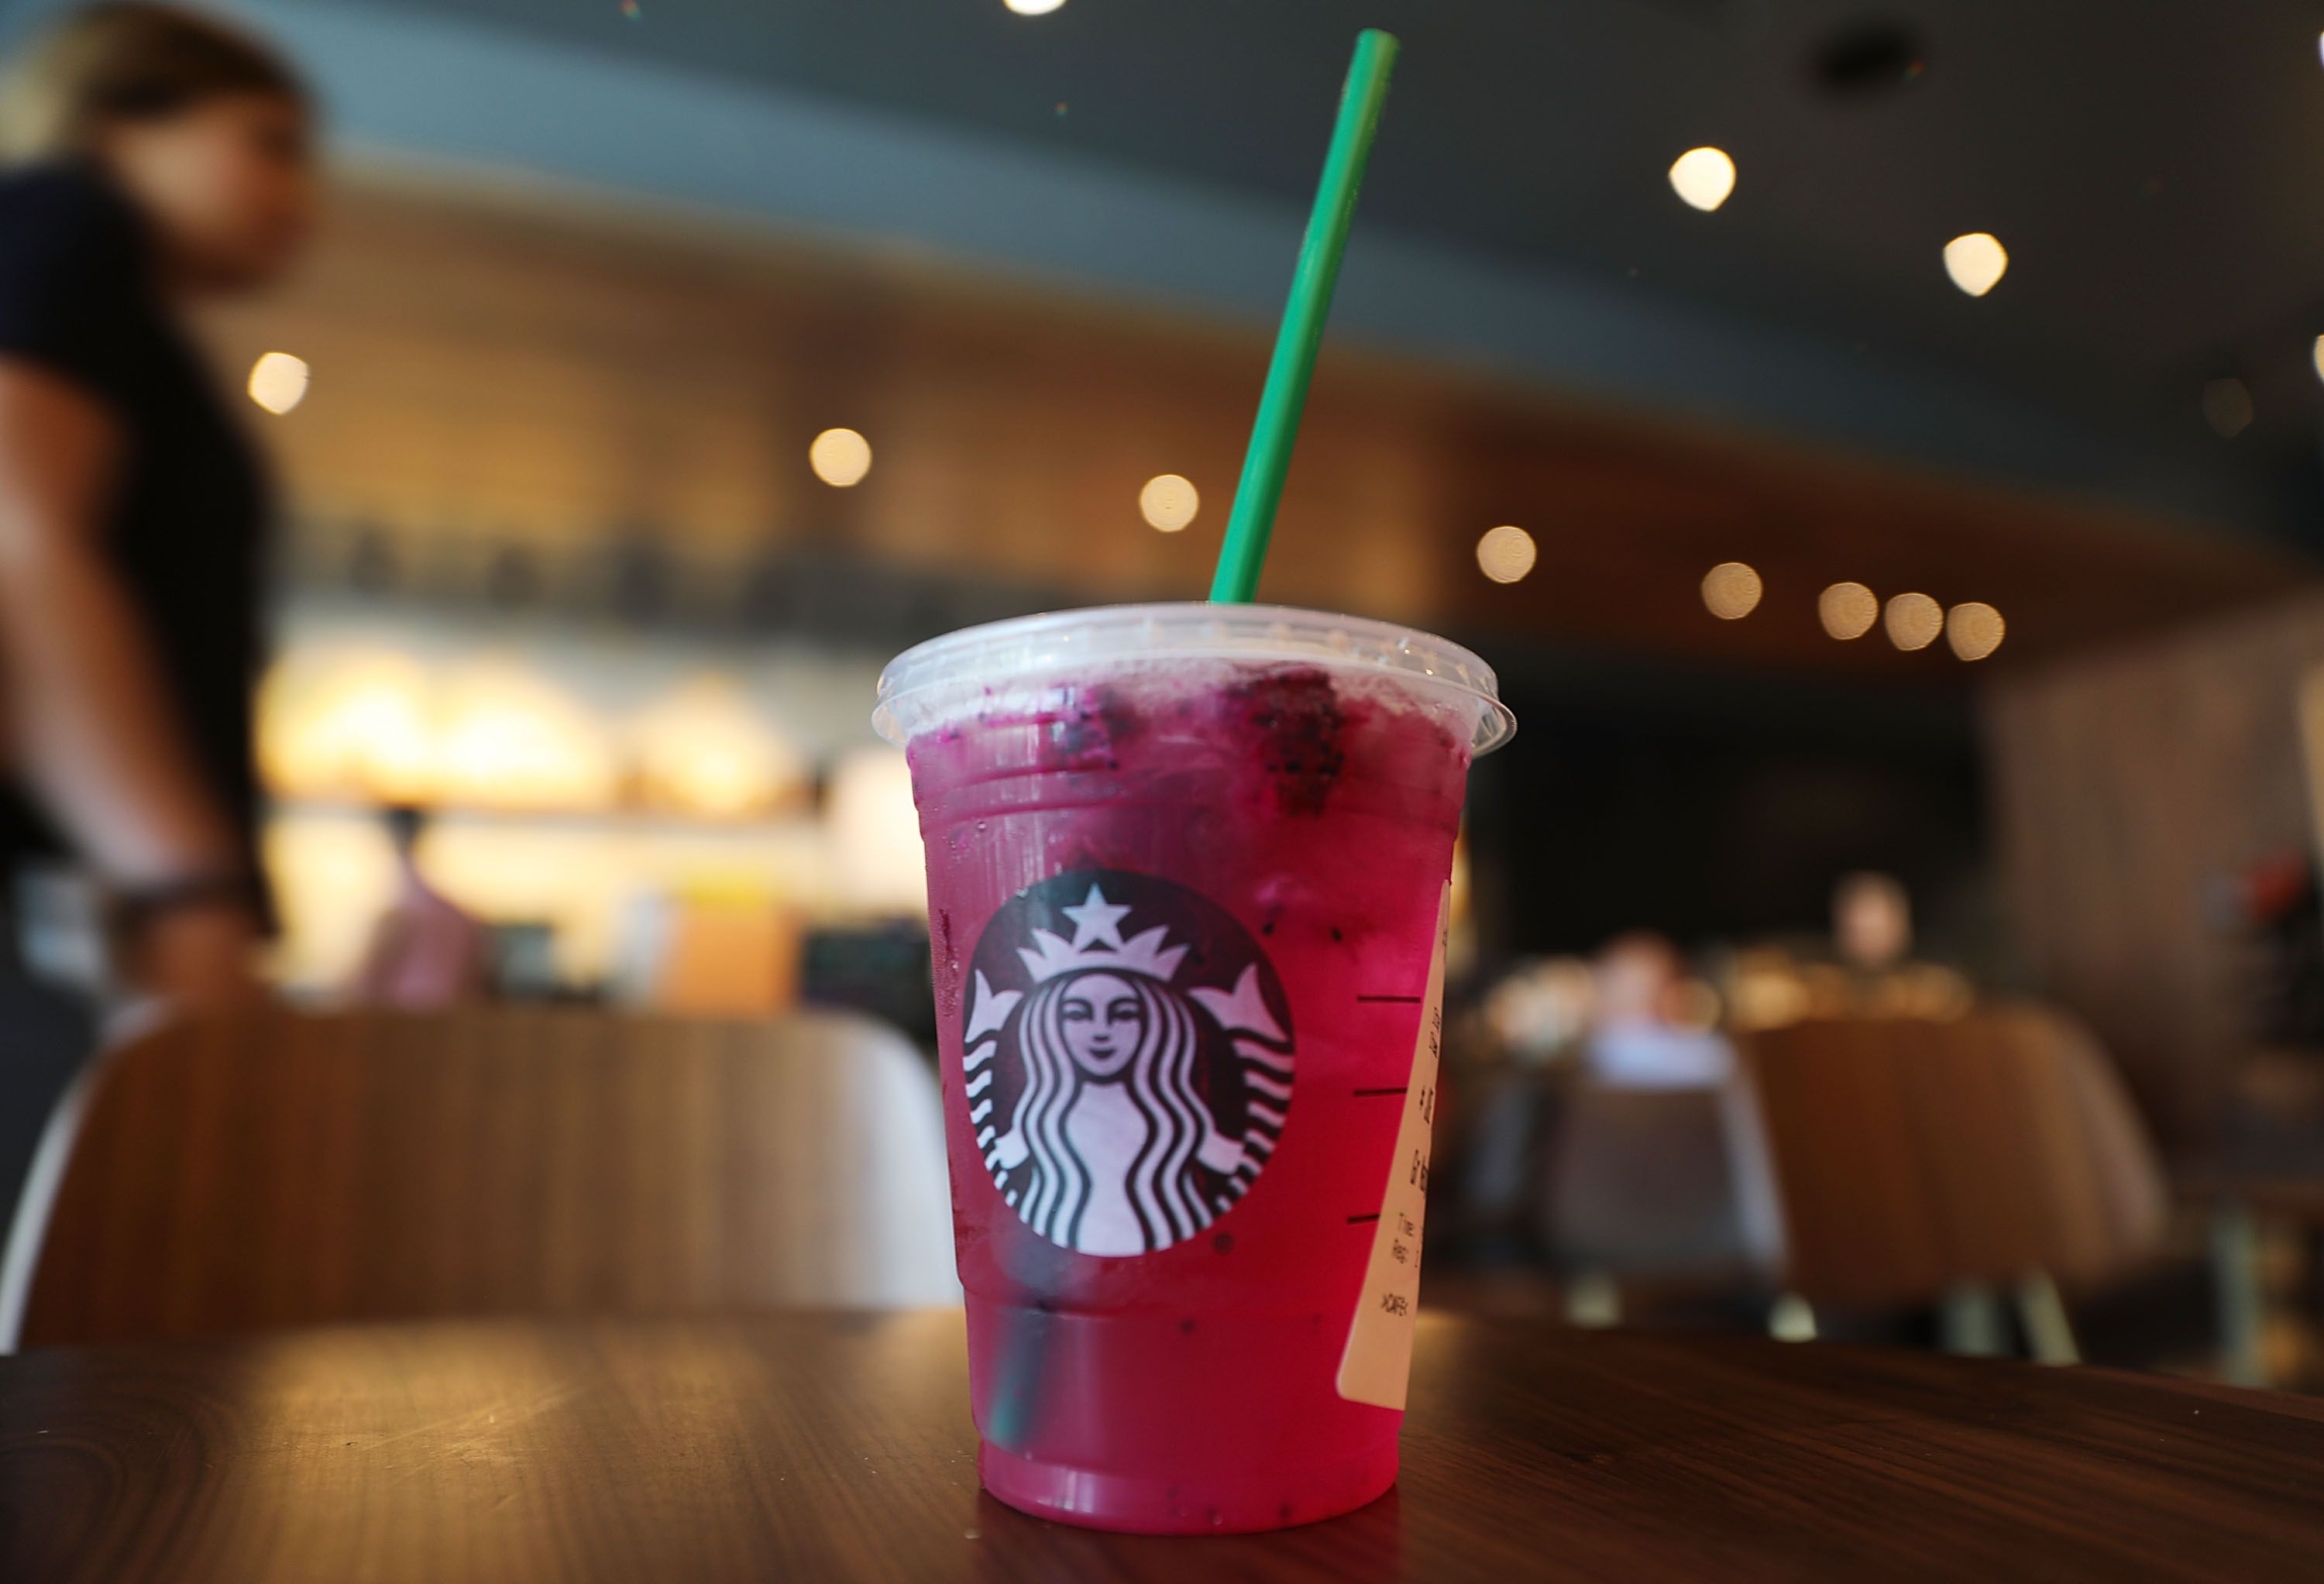 Starbucks Fall Cups for 2023 Include a Glow-in-the-Dark Slime Tumbler -  Let's Eat Cake